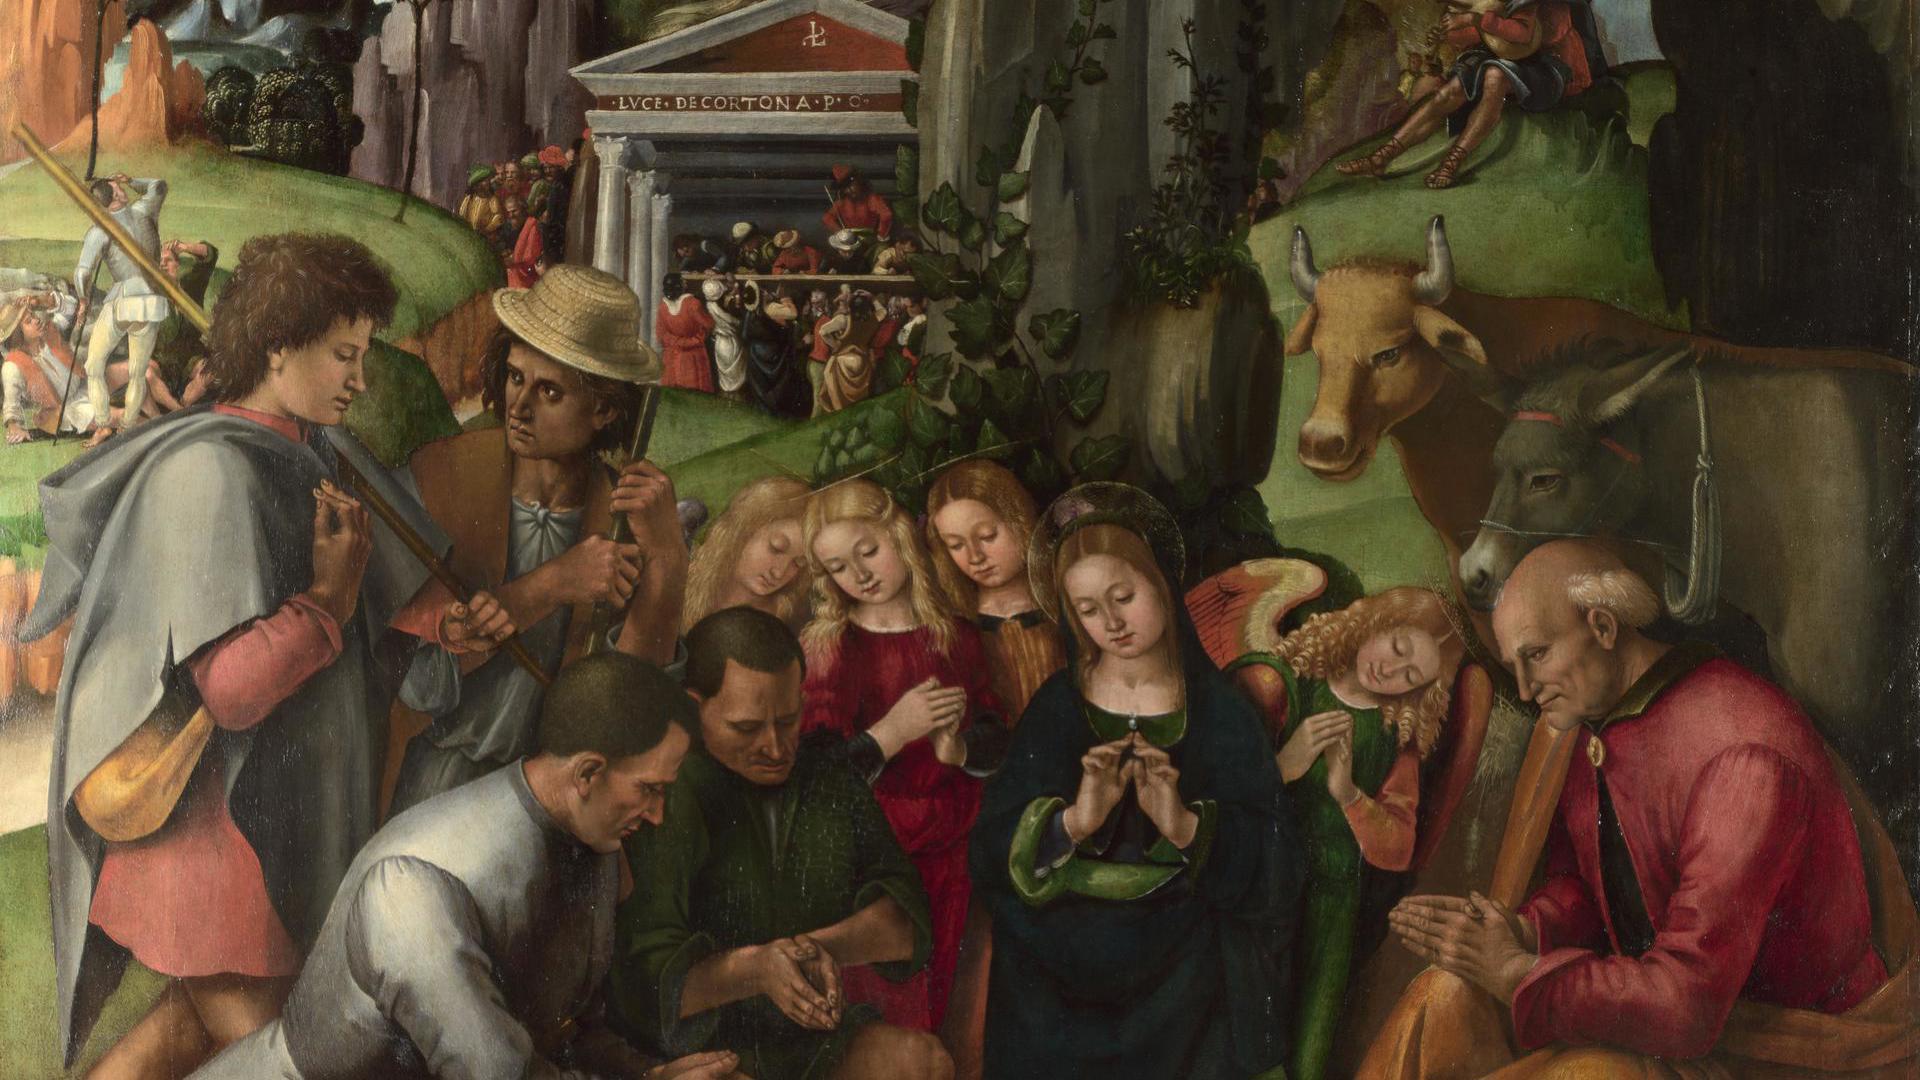 The Adoration of the Shepherds by Luca Signorelli